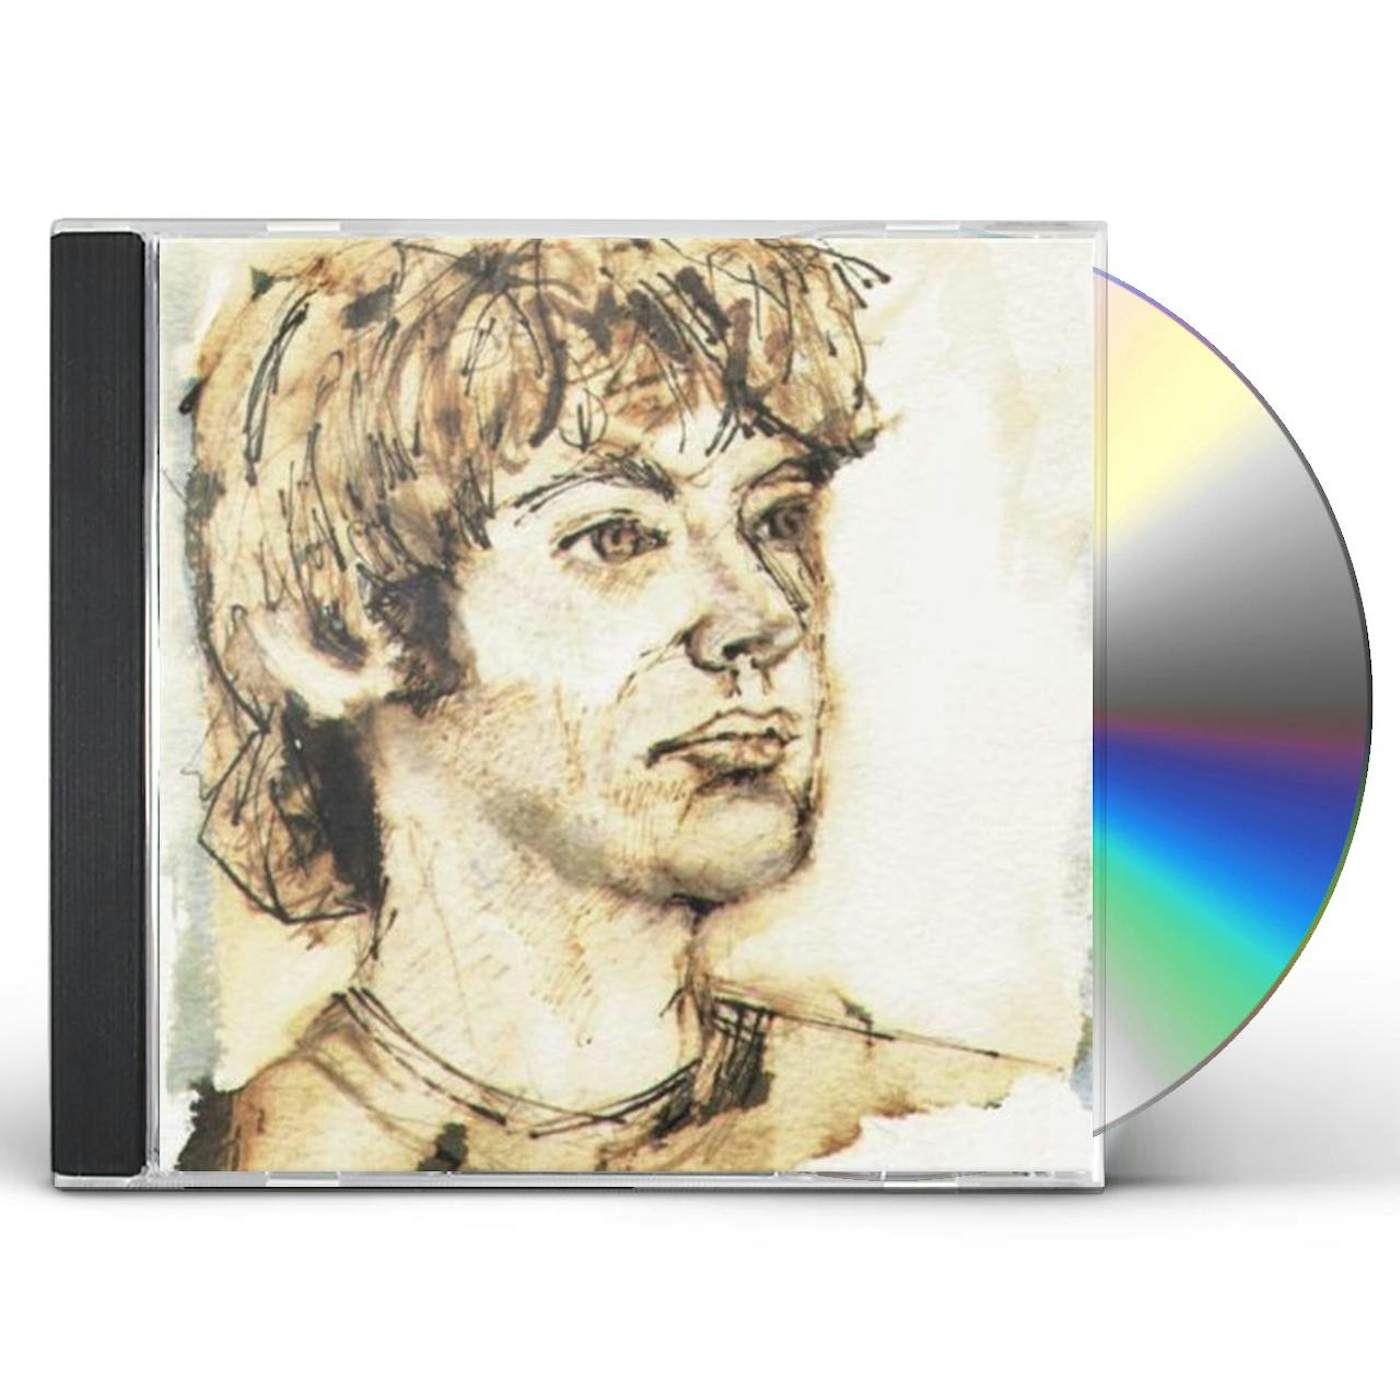 Richard Youngs MAKING PAPER CD